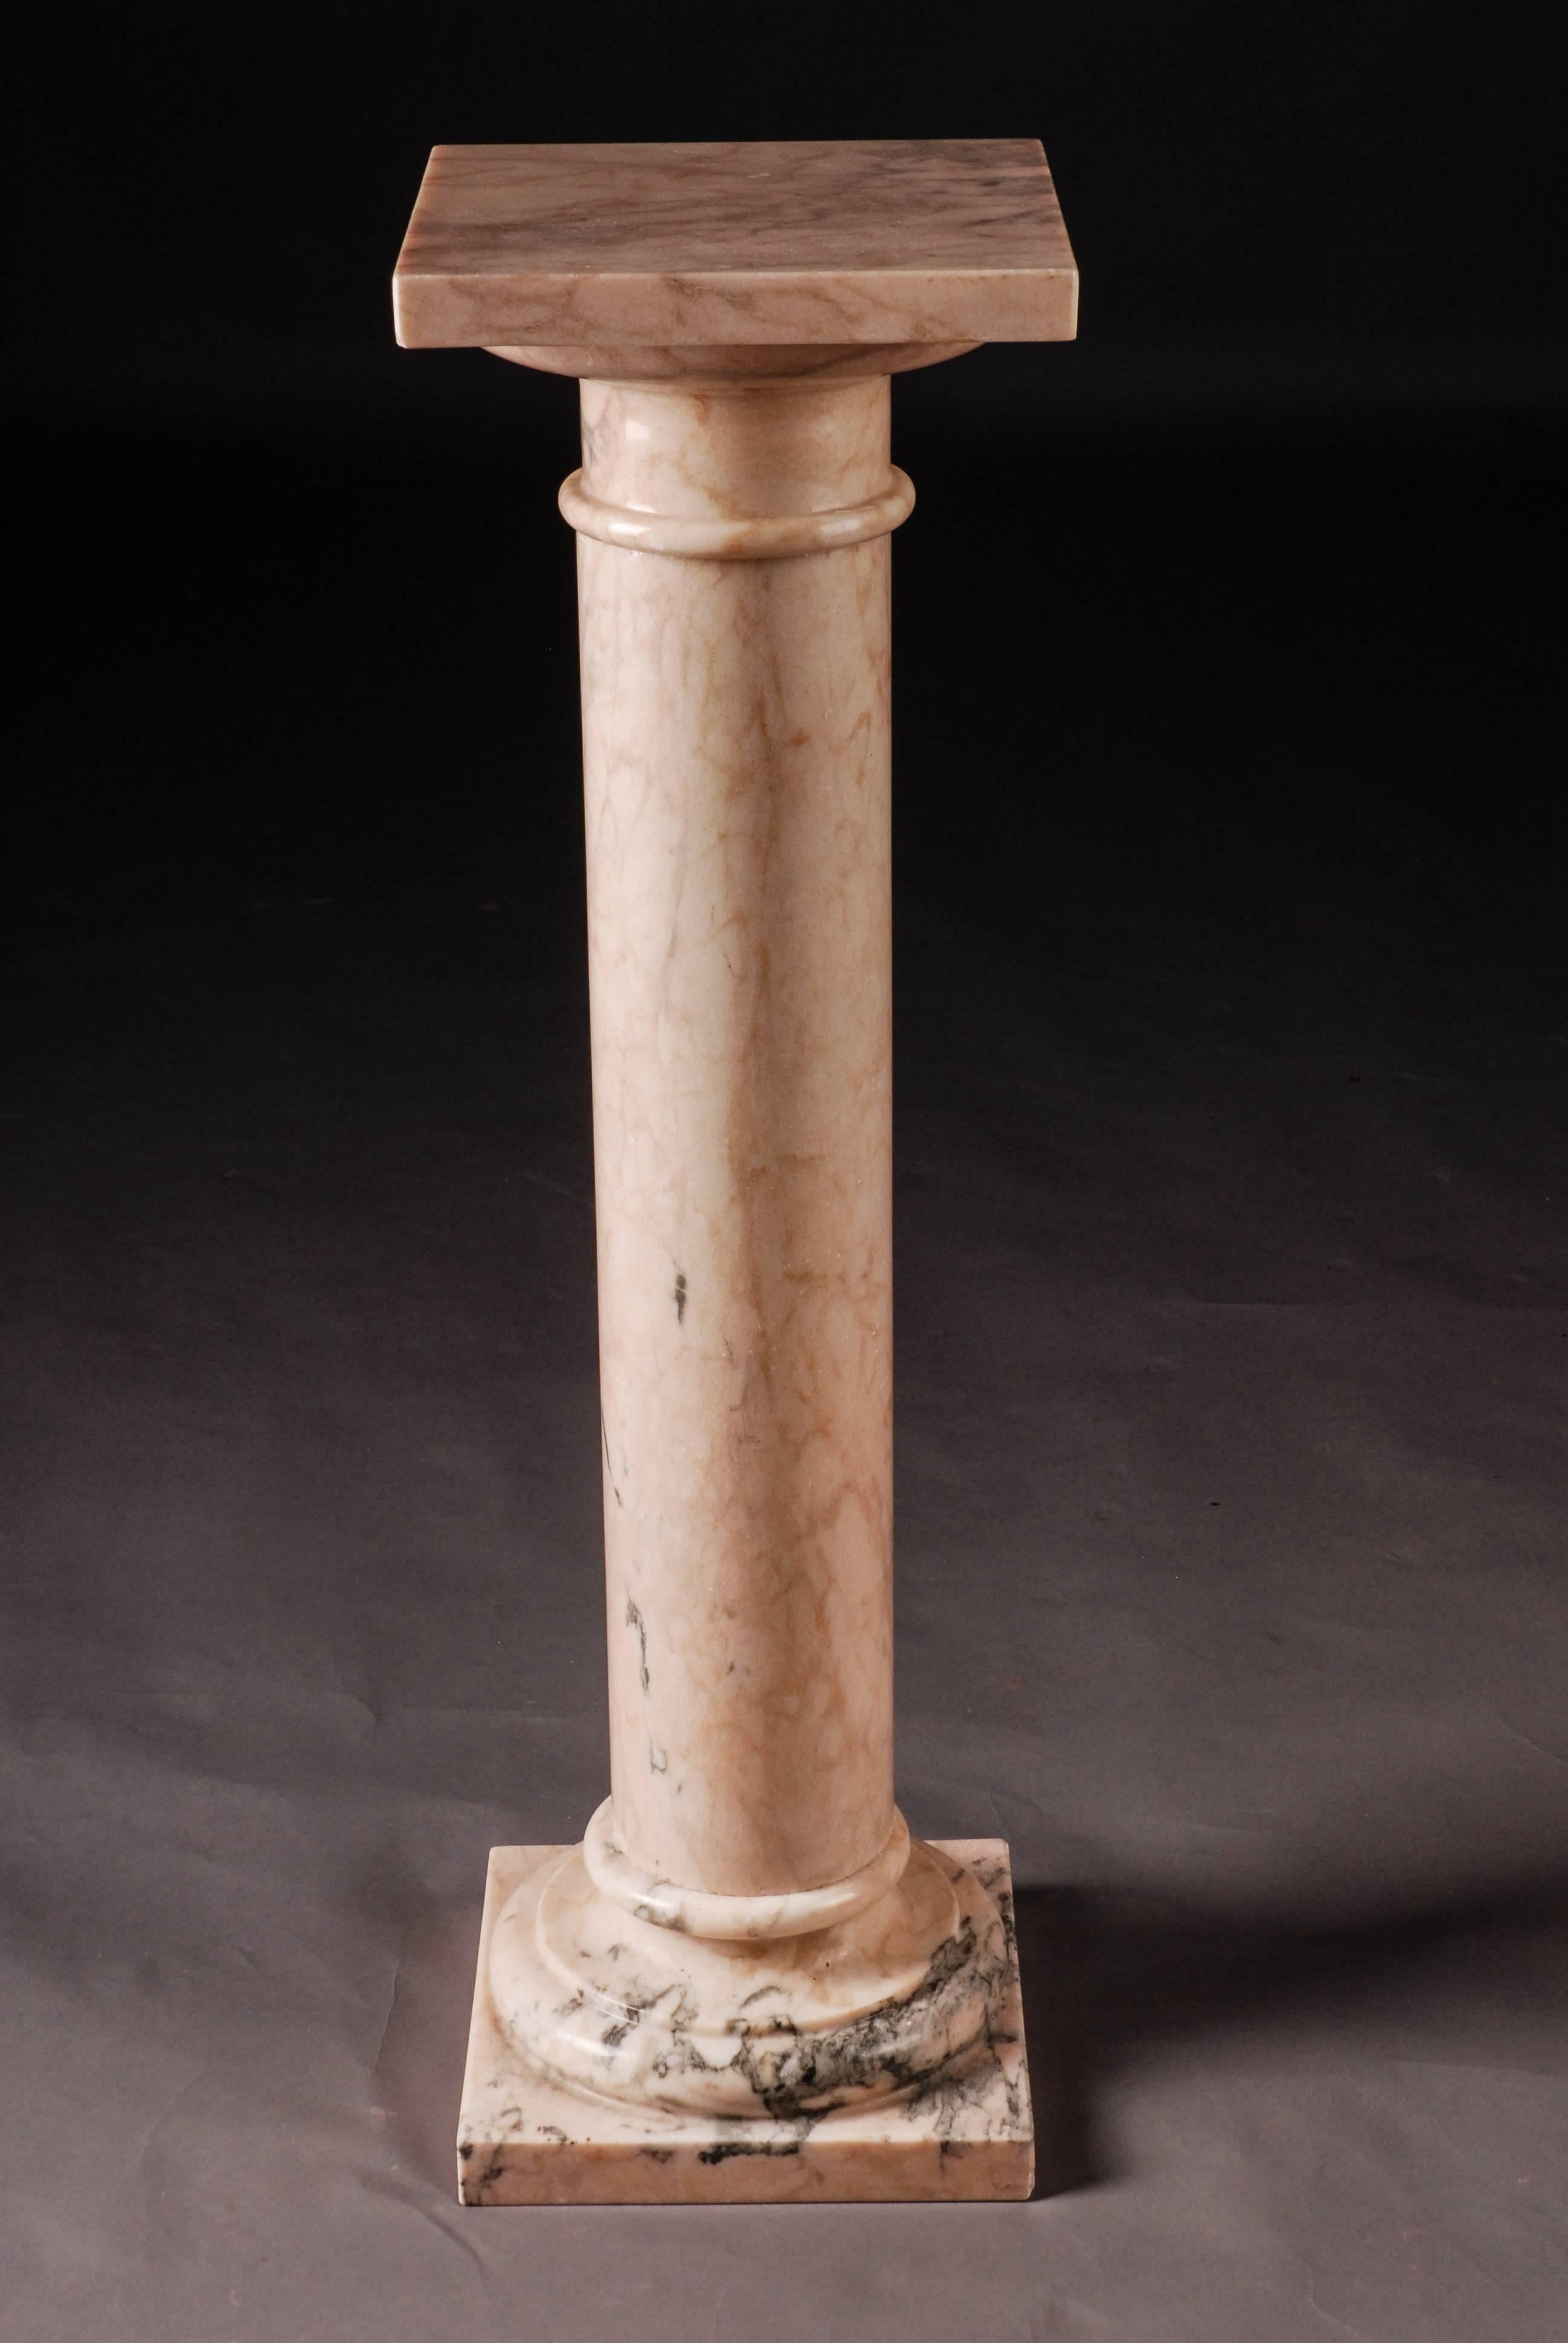 Bright marbled rosé. Square plinth with balustrade-shaped column base. Wide, stepped square top plate. The column consists of several parts.

(K-28).